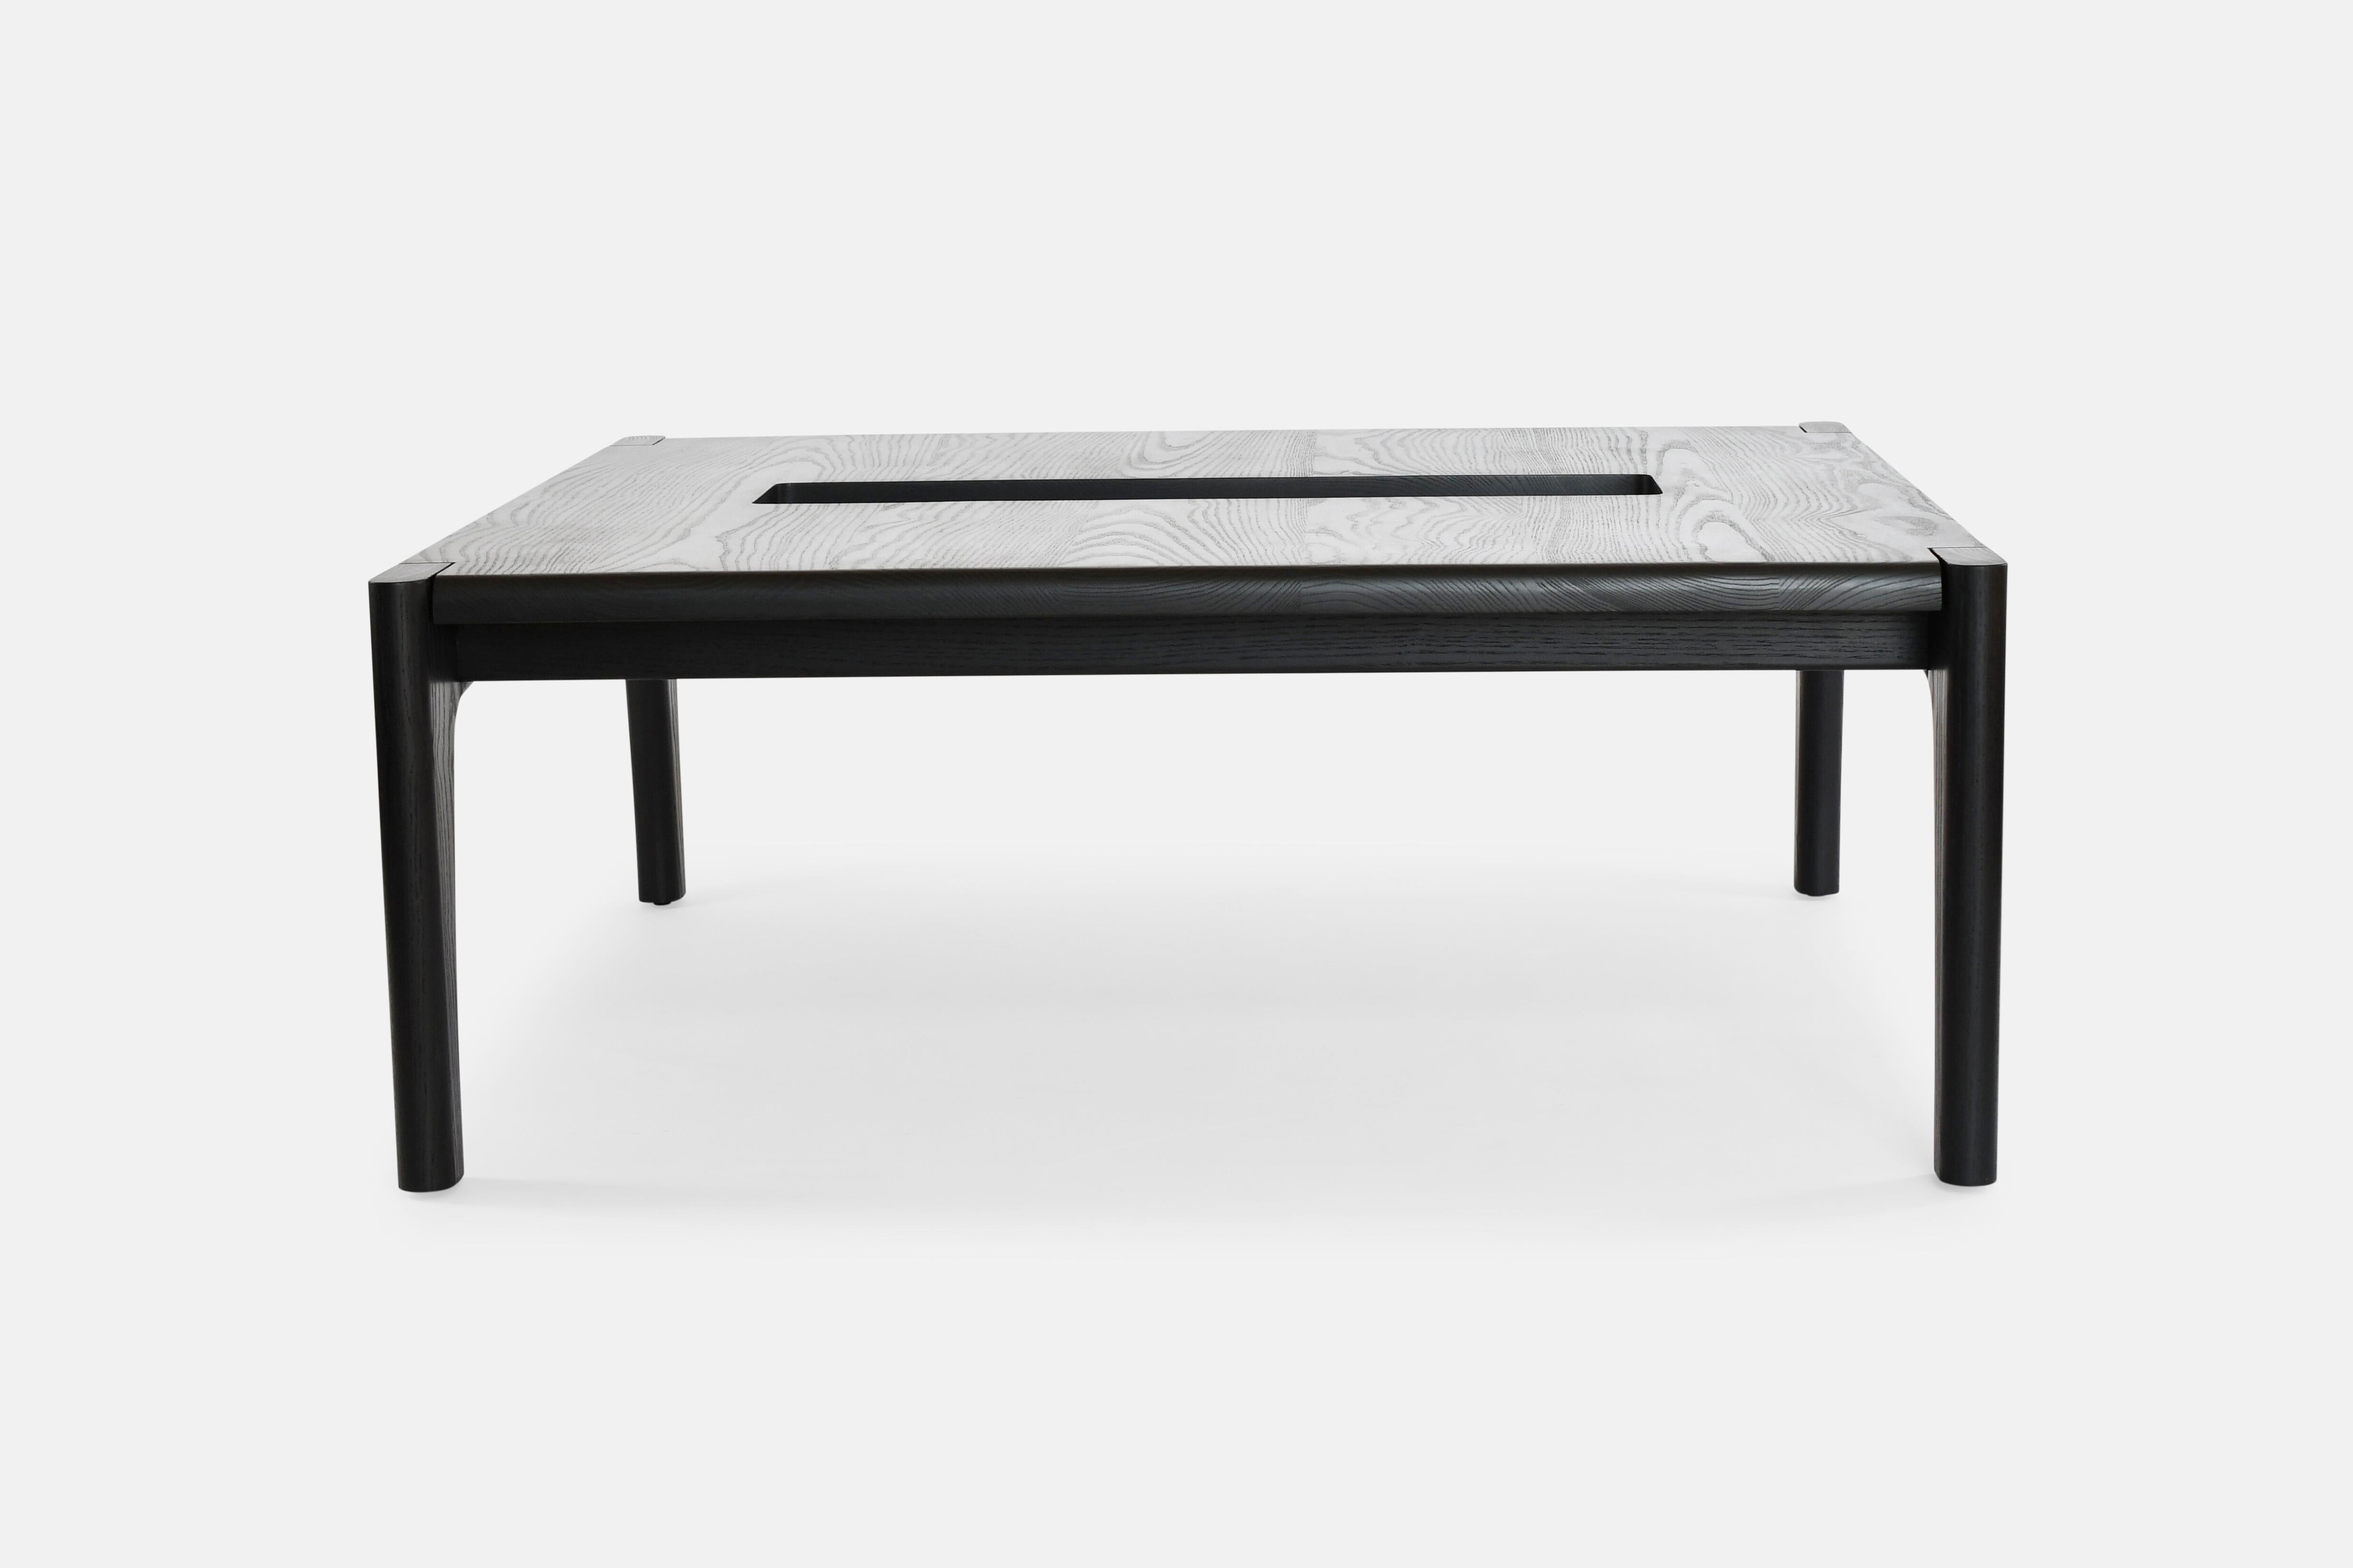 The Tayo coffee table combines organic richness with mid-century lines creating a piece that could almost run on its own. The table features an aperture in the center as a two-tier focal point for book and accessory display. Great for dinner and a